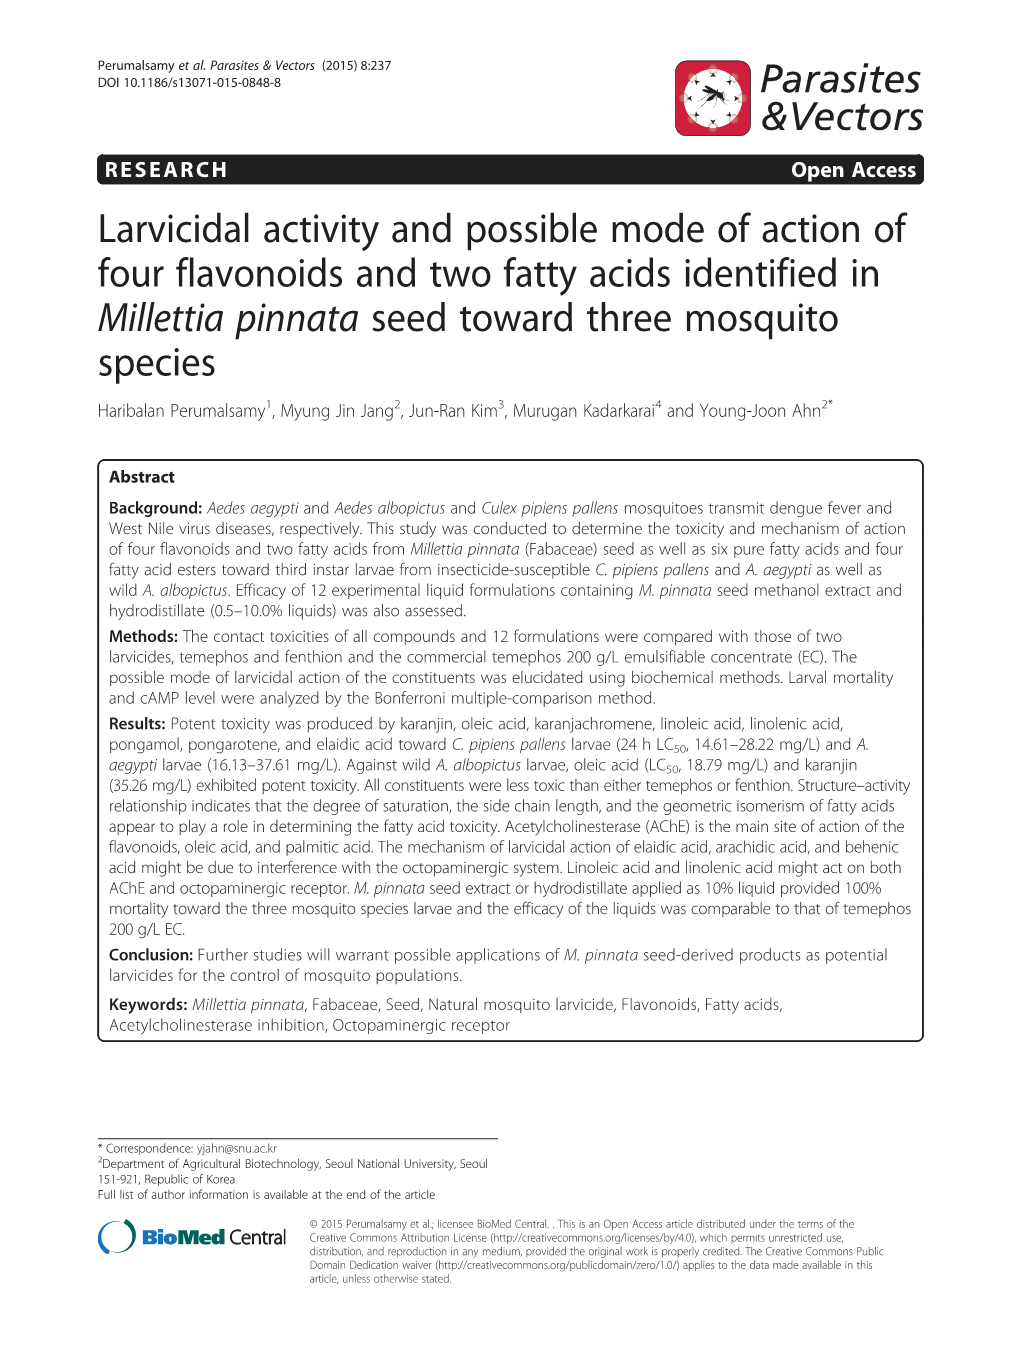 Larvicidal Activity and Possible Mode of Action of Four Flavonoids and Two